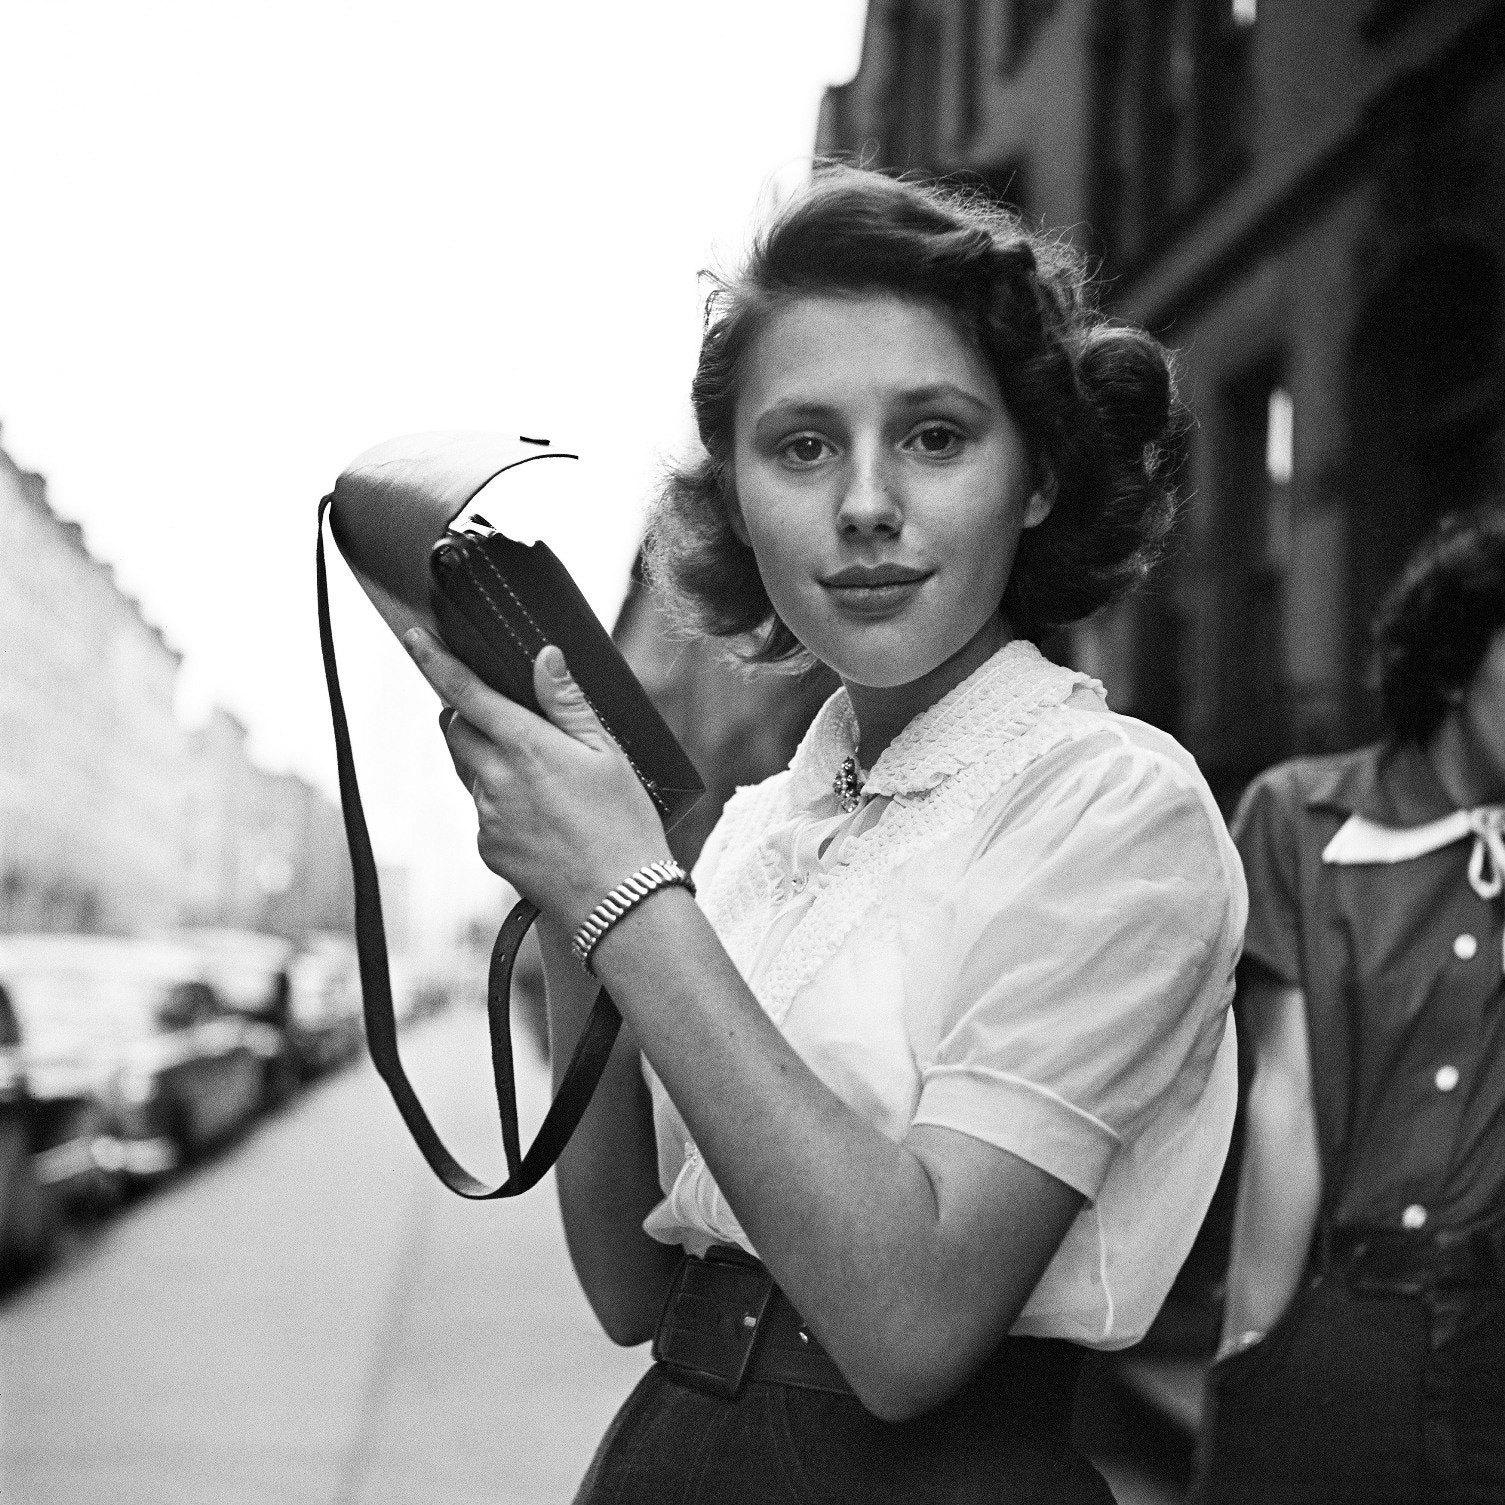 Revisit Five Decades' Worth of the Photographer Vivian Maier's